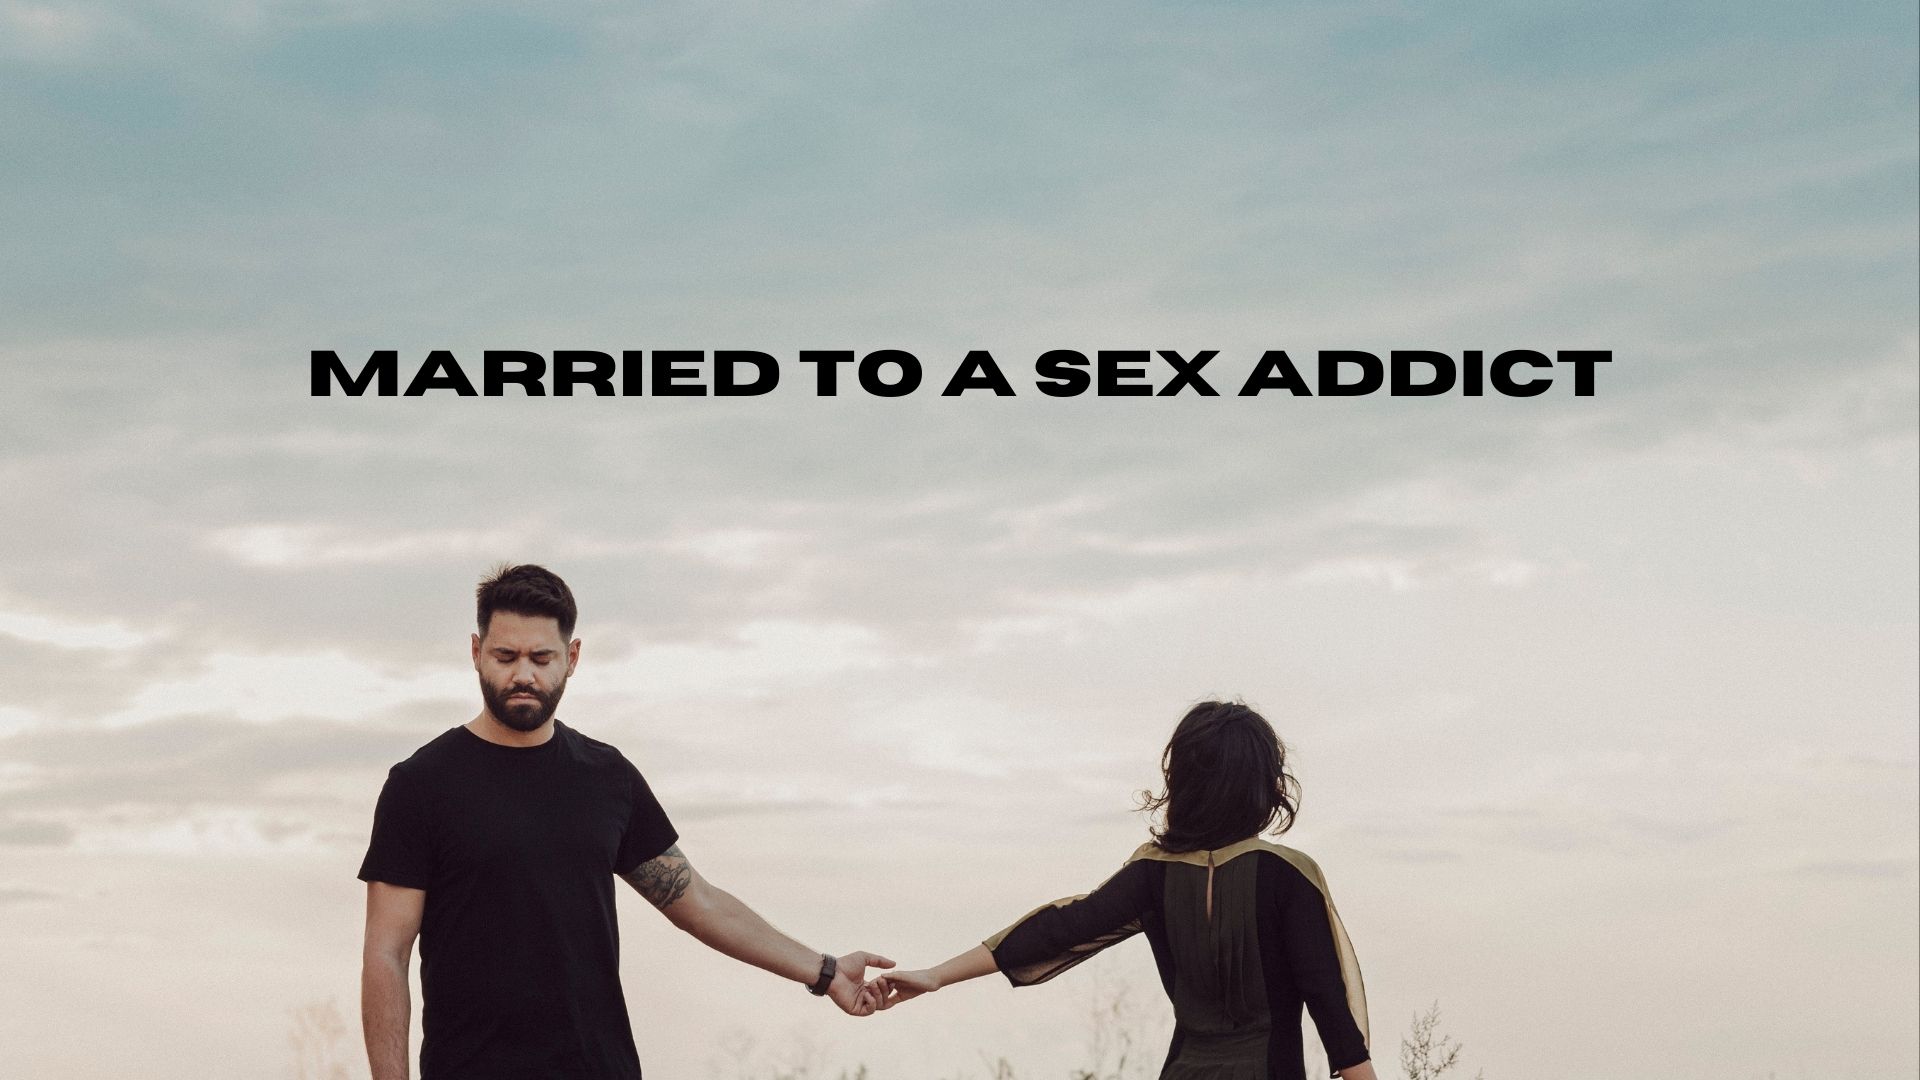 Married to a Sex Addict hq image